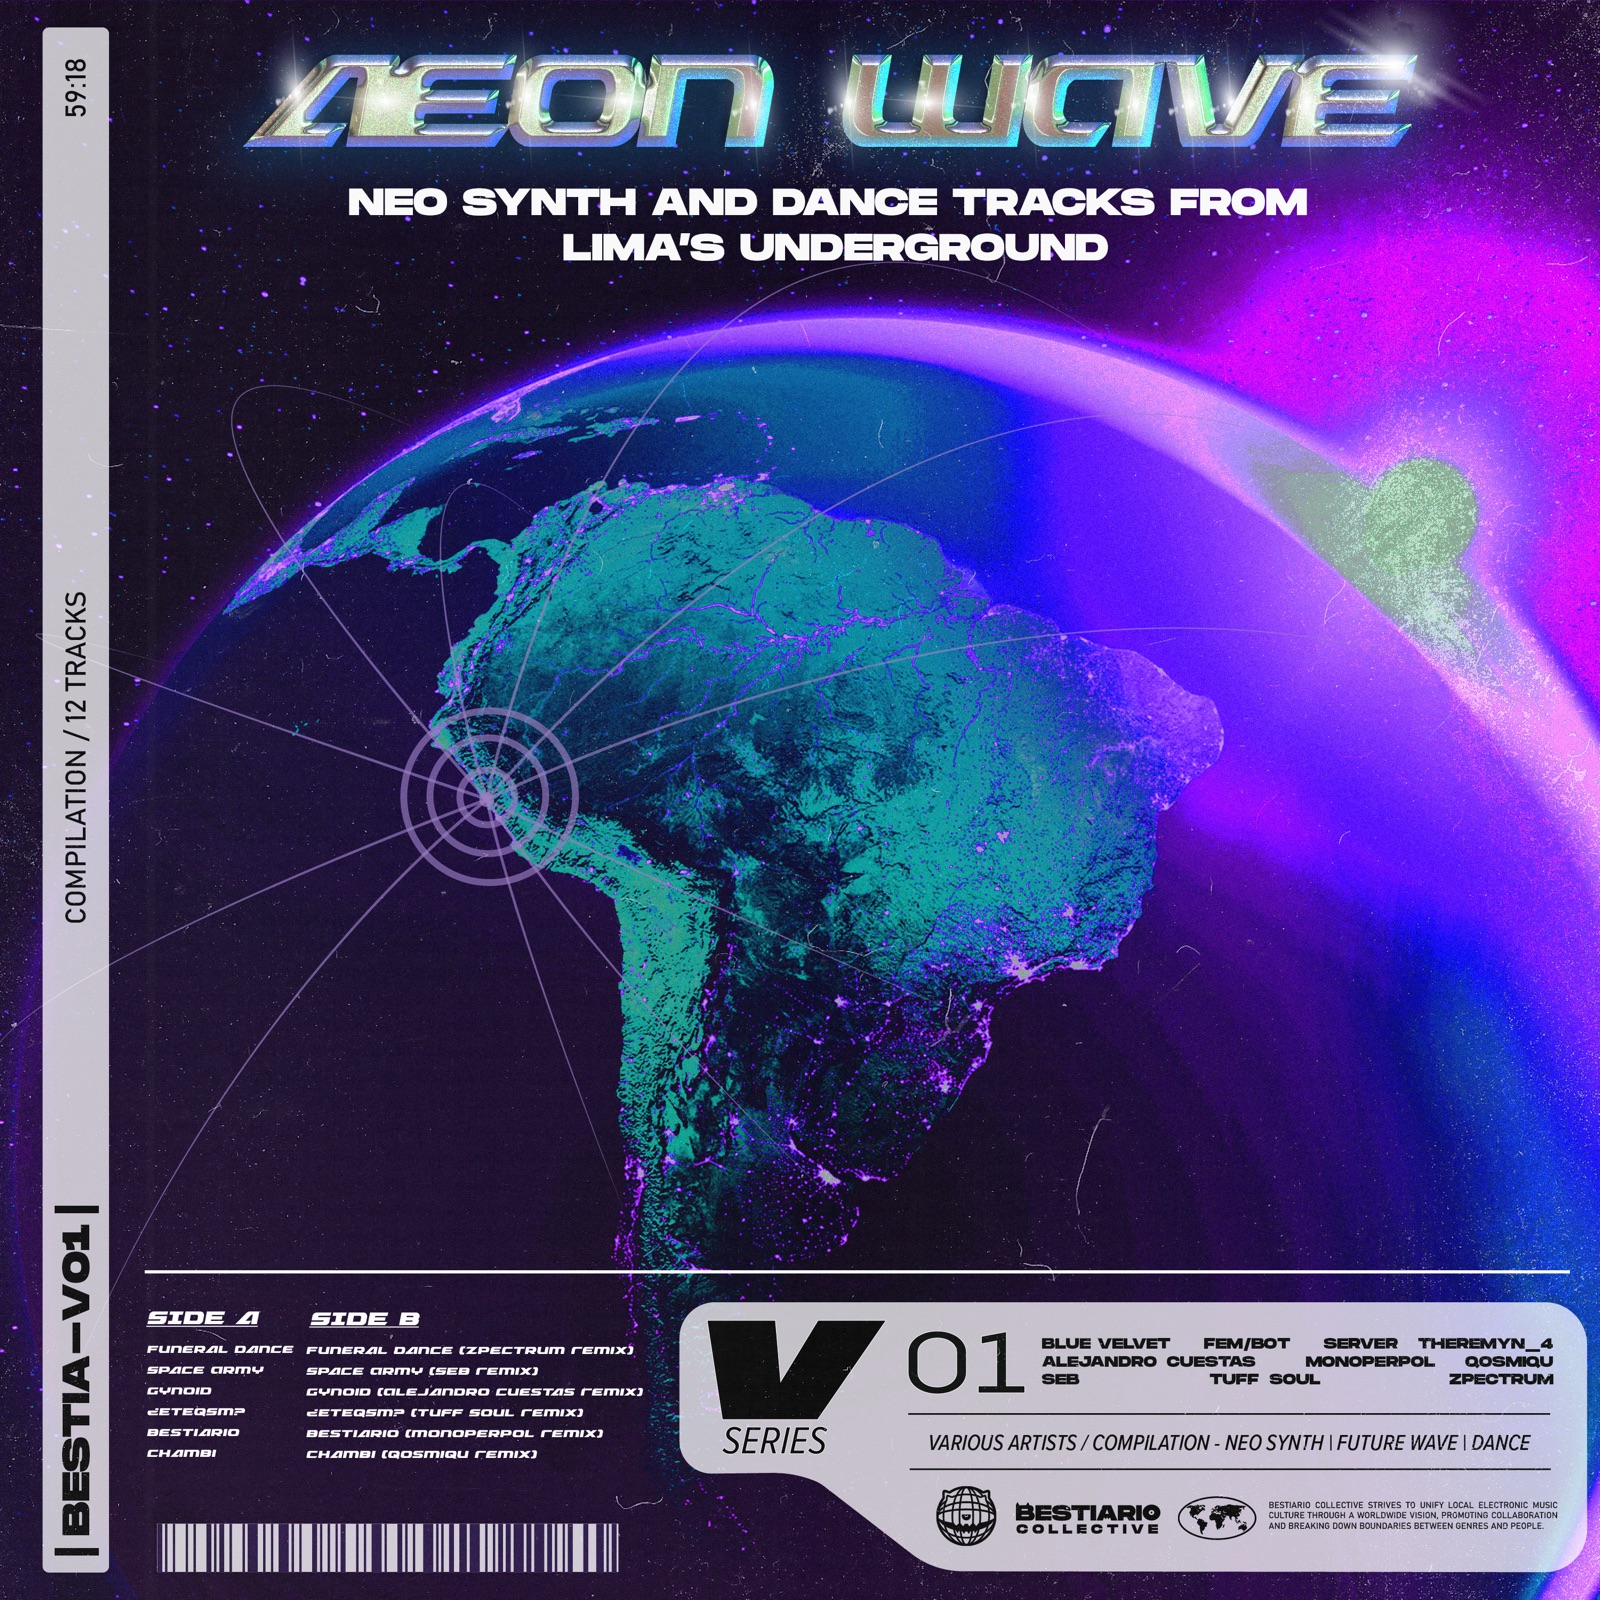 Aeon Wave: Neo Synth and Dance Tracks from Lima's Underground